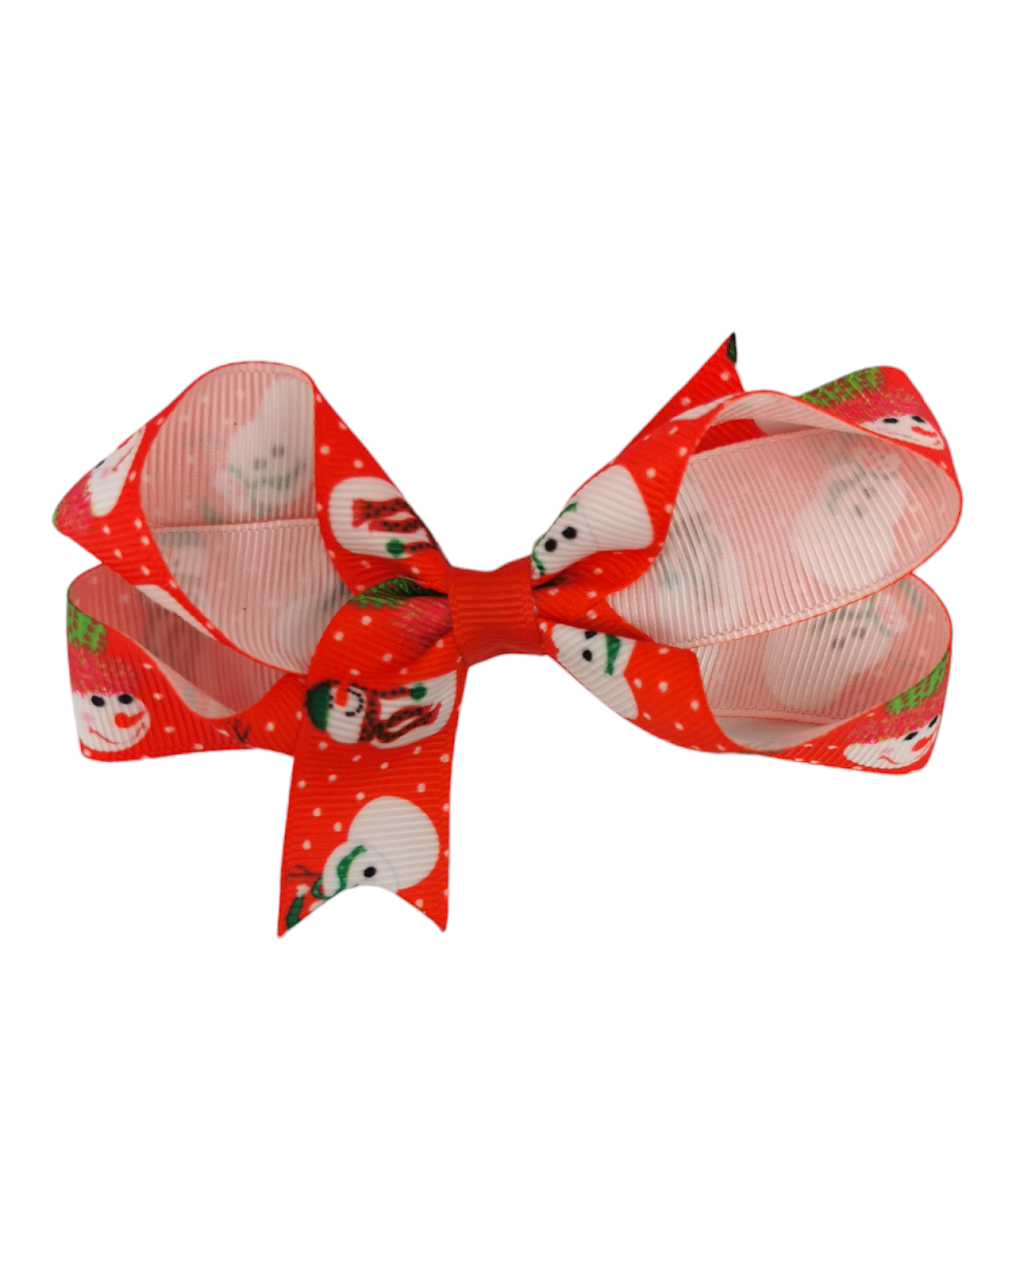 Pack of 5 - 3.5 inch Christmas Bow Clips #3 - Betty Brown Boutique Ltd